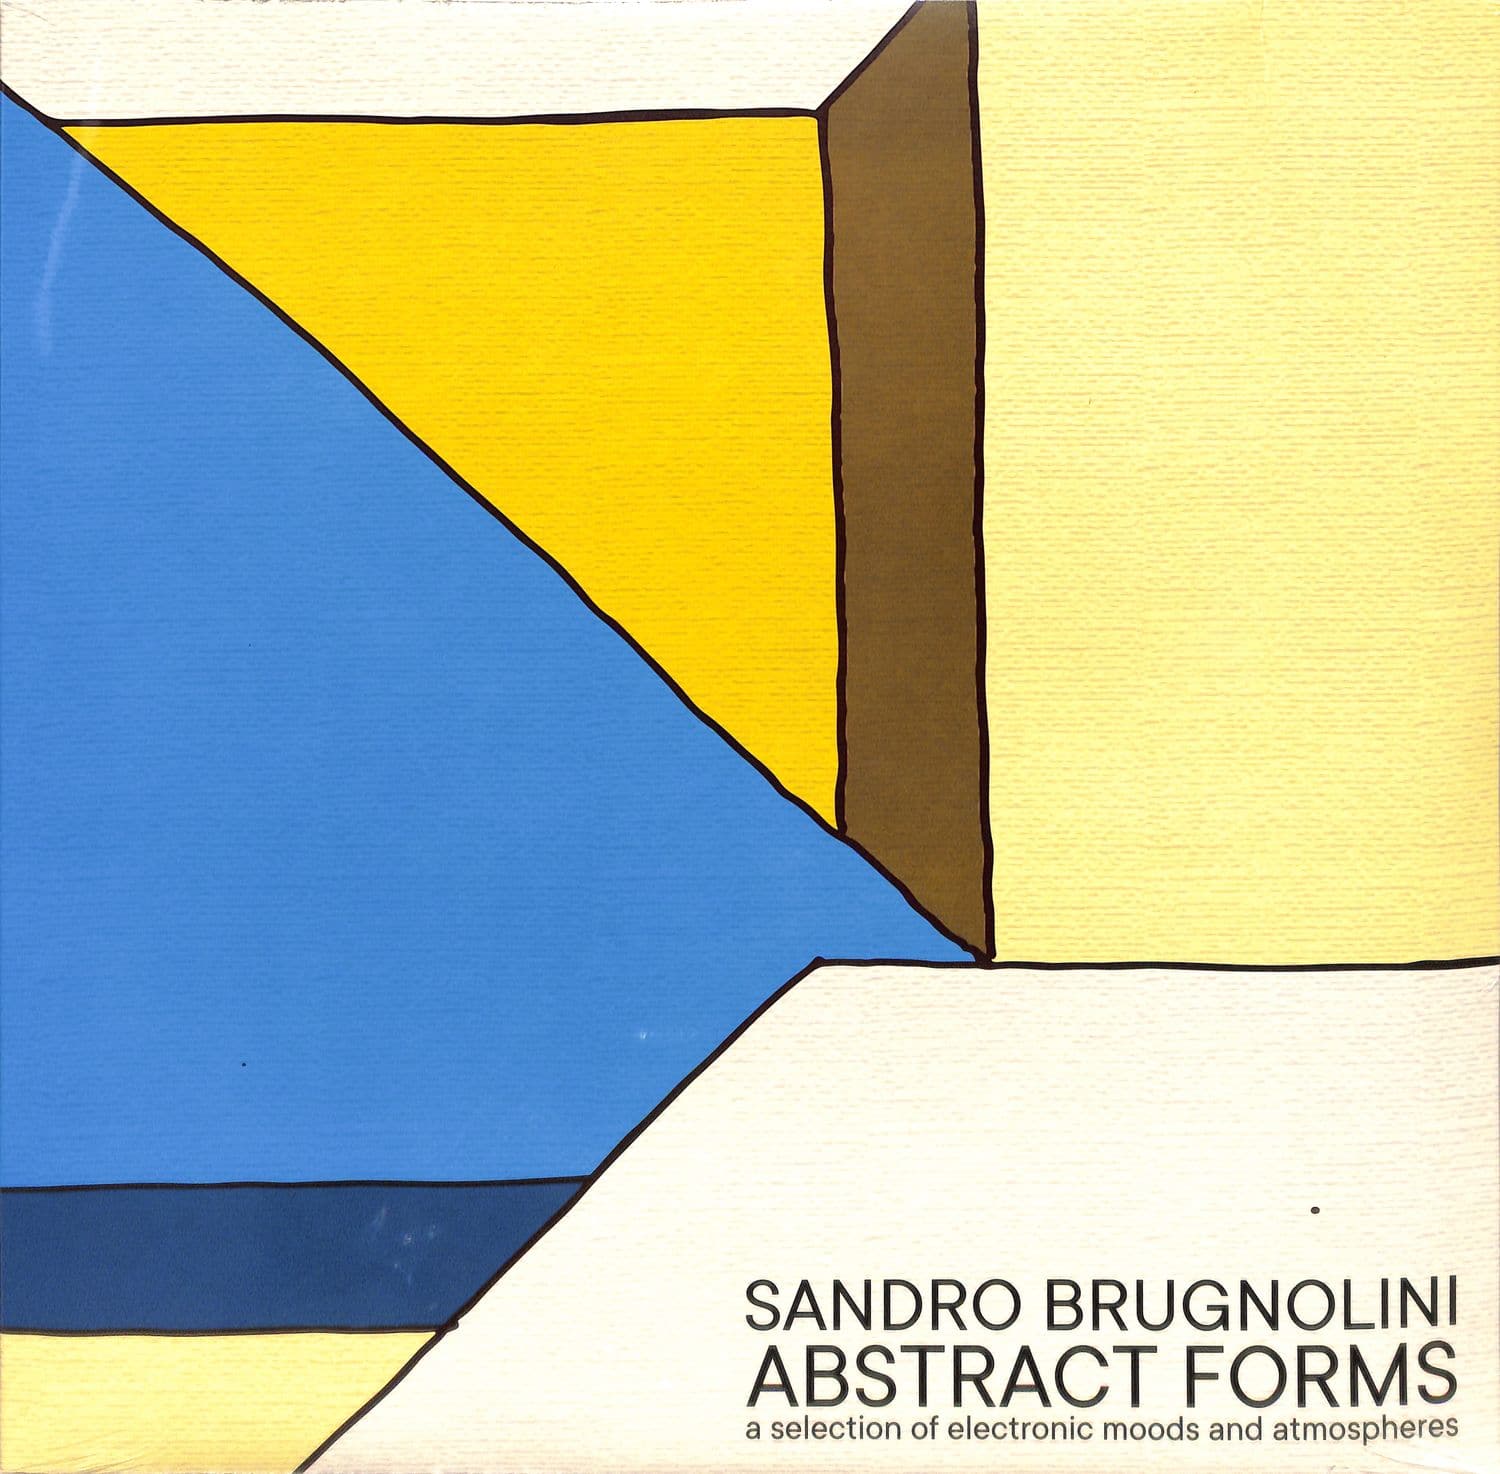 Sandro Brugnolini - ABSTRACT FORMS 